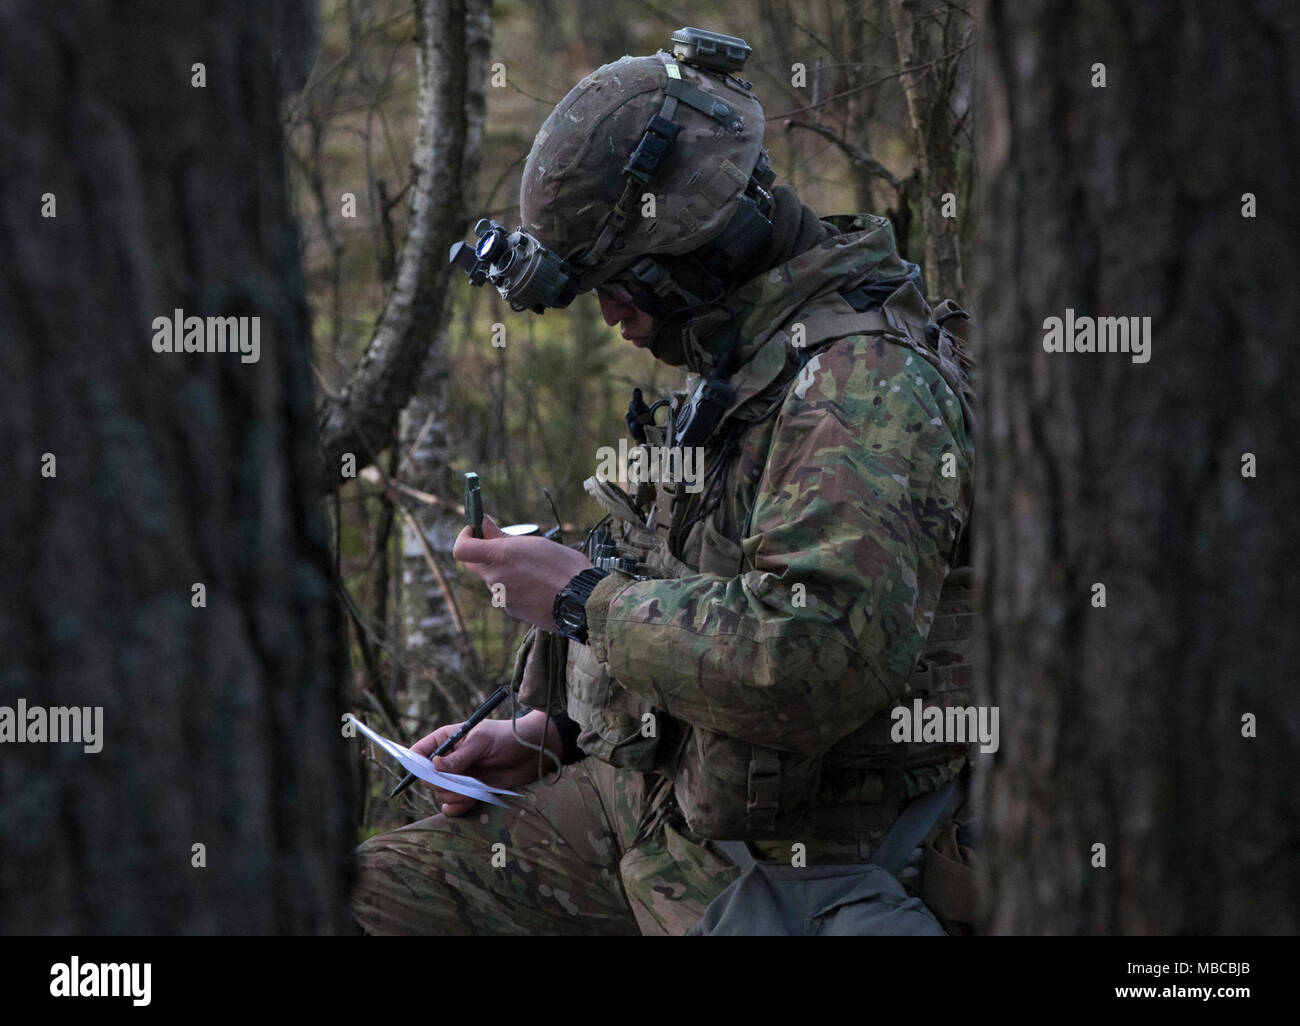 A U.S. Soldier assigned to Iron Troop, 3rd Squadron, 2nd Cavalry Regiment, uses a compass to shoot an azmuth as he acquires his team's coordinates while participating in the multinational training exercise Puma at a range near the Bemowo Piskie Training Area, Poland, Feb. 19, 2018. These Soldiers are part of the unique, multinational battle group comprised of U.S., U.K., Croatian and Romanian soldiers who serve with the Polish 15th Mechanized Brigade as a deterrence force in northeast Poland in support of NATO’s Enhanced Forward Presence. (U.S. Army Stock Photo